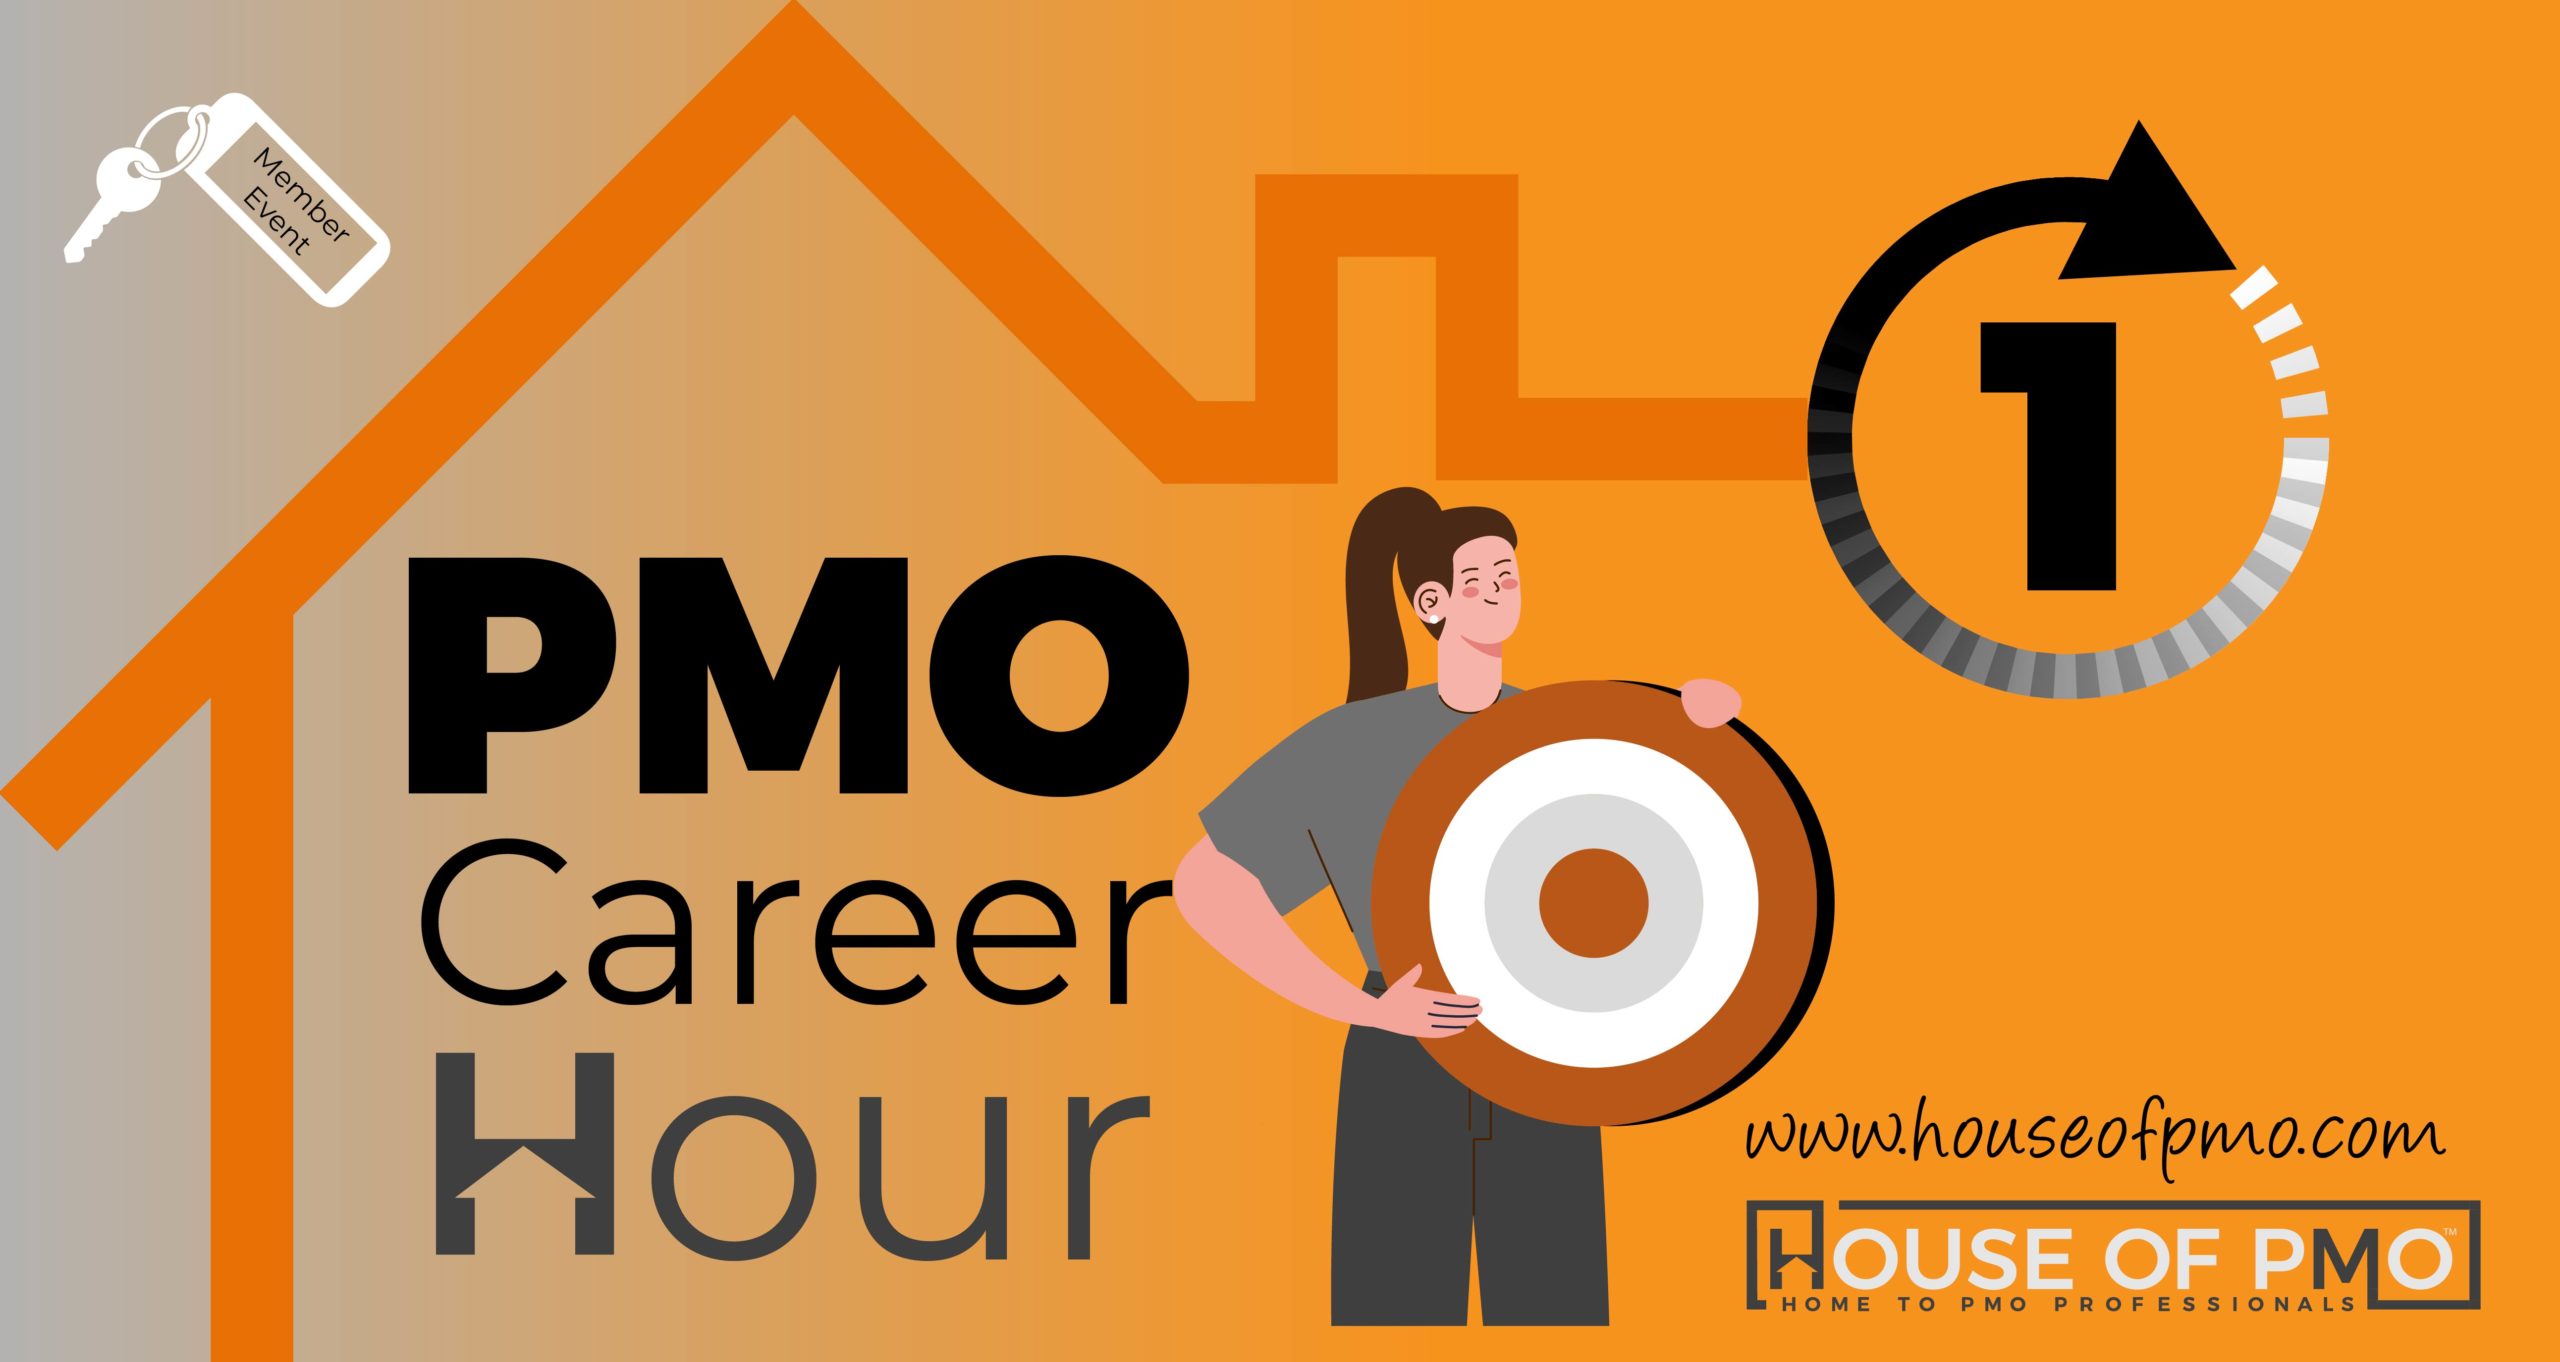 An image of a woman holding a target to advertise the PMO Career Hour event becoming a PMO consultant